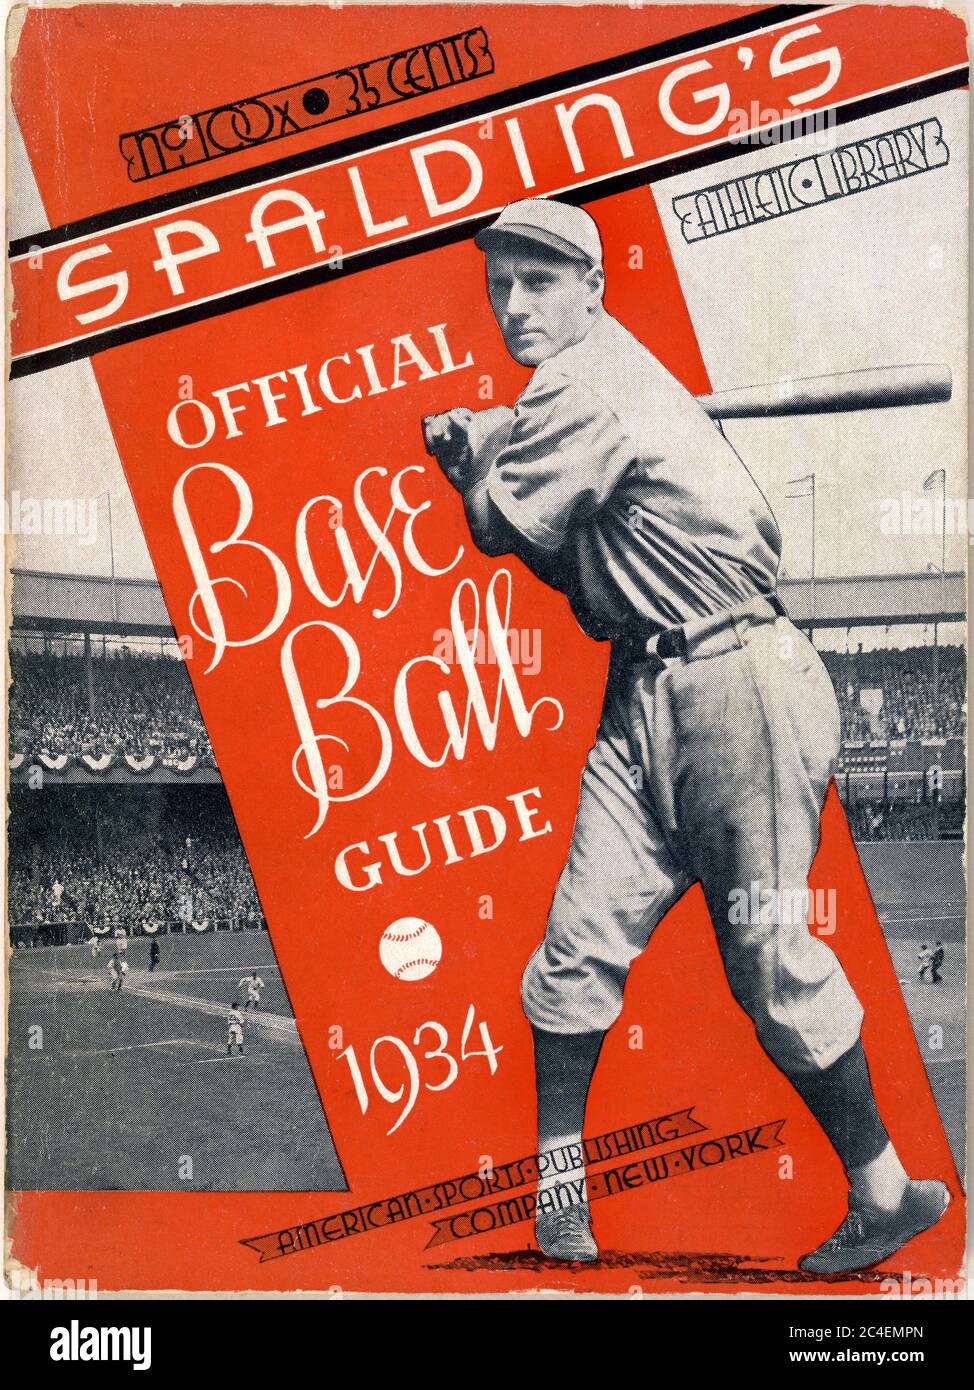 Spalding's Official Baseball Guide, A.G. Spalding & Bros., American Sports Publishing Company, 1934 Foto Stock